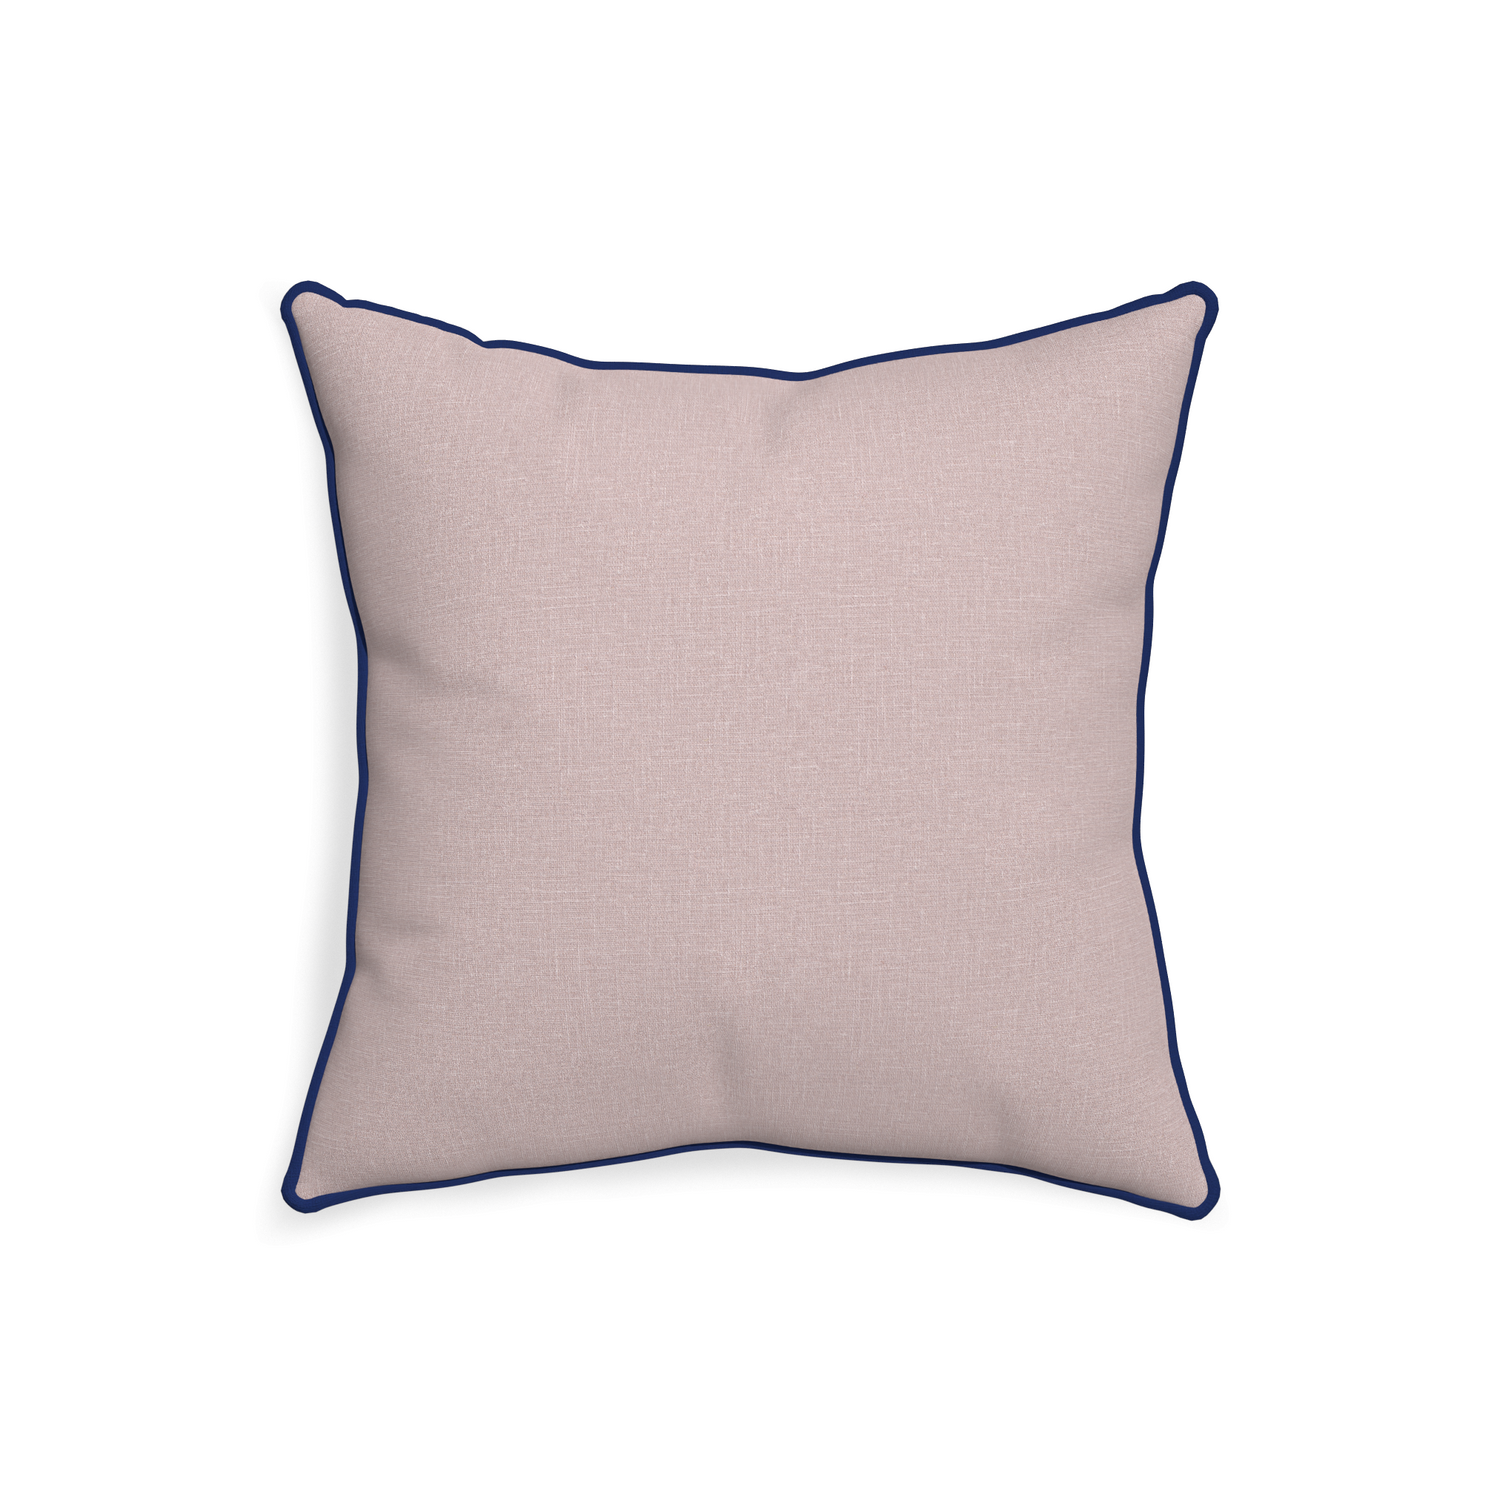 20-square orchid custom mauve pinkpillow with midnight piping on white background